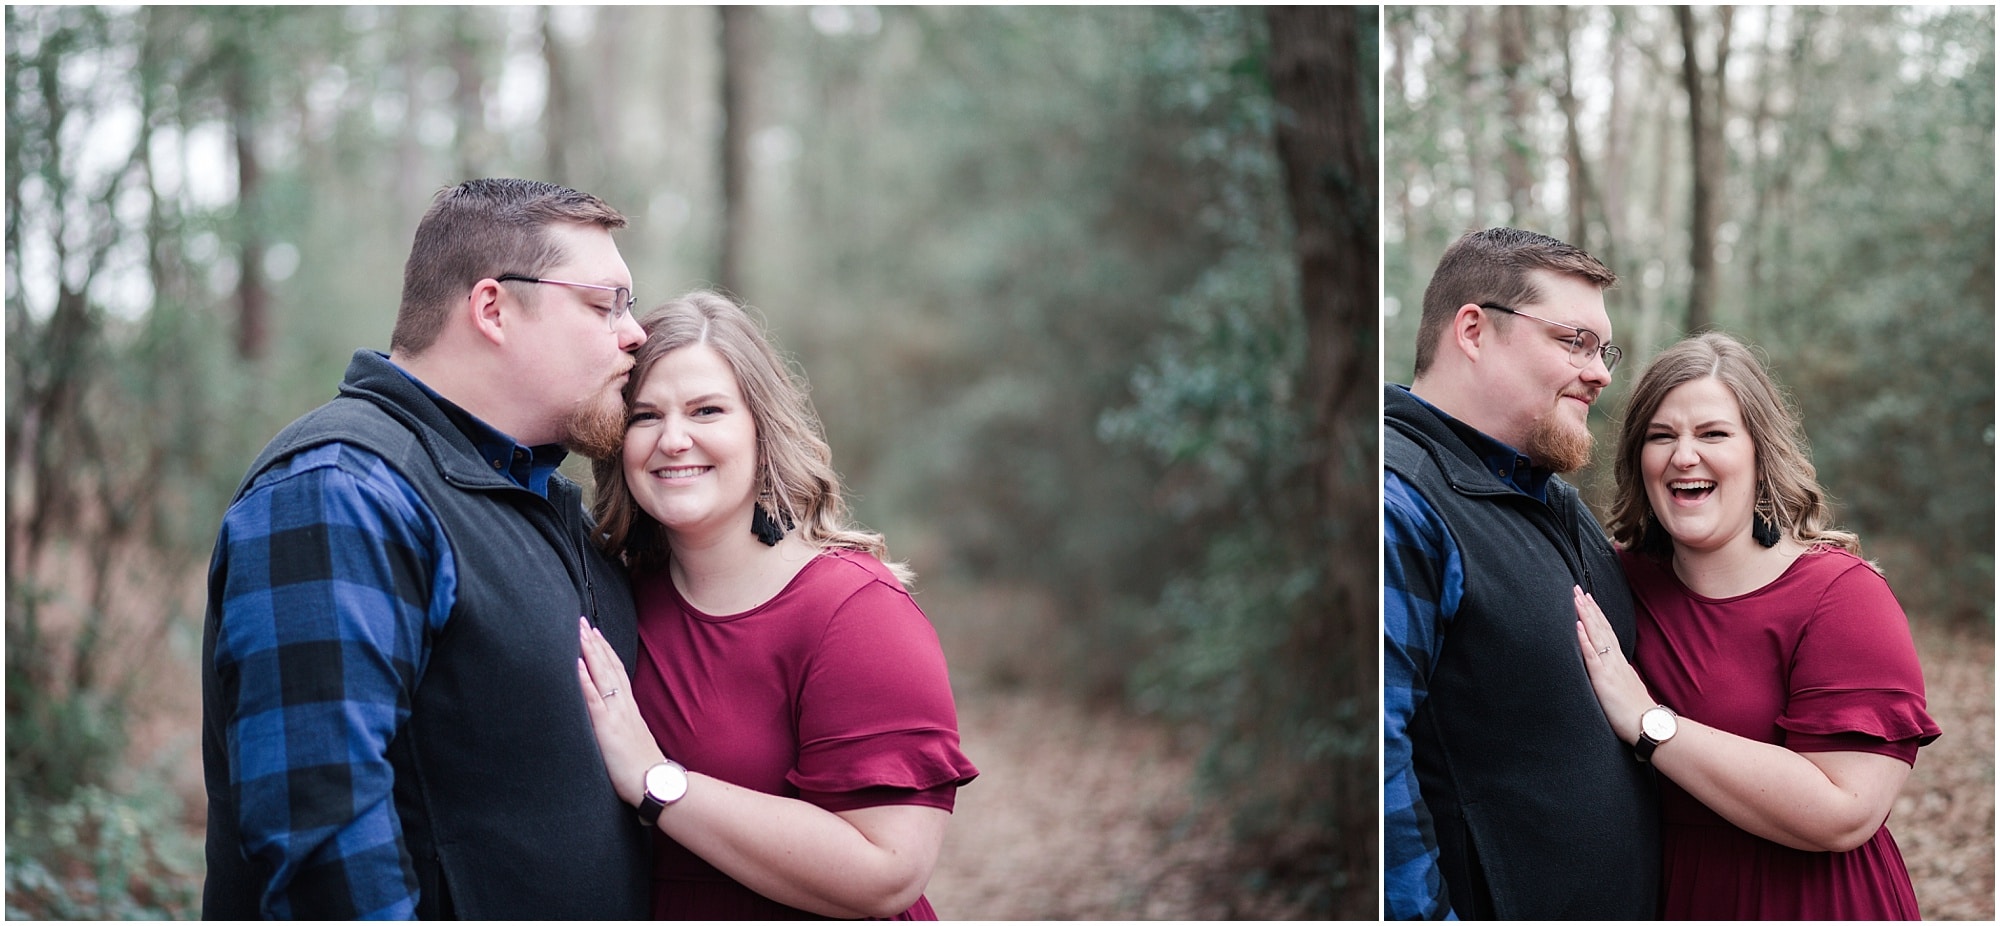 fun engagement session at Christia V Adair Park in Houston, Texas photographed by Swish and Click Photography